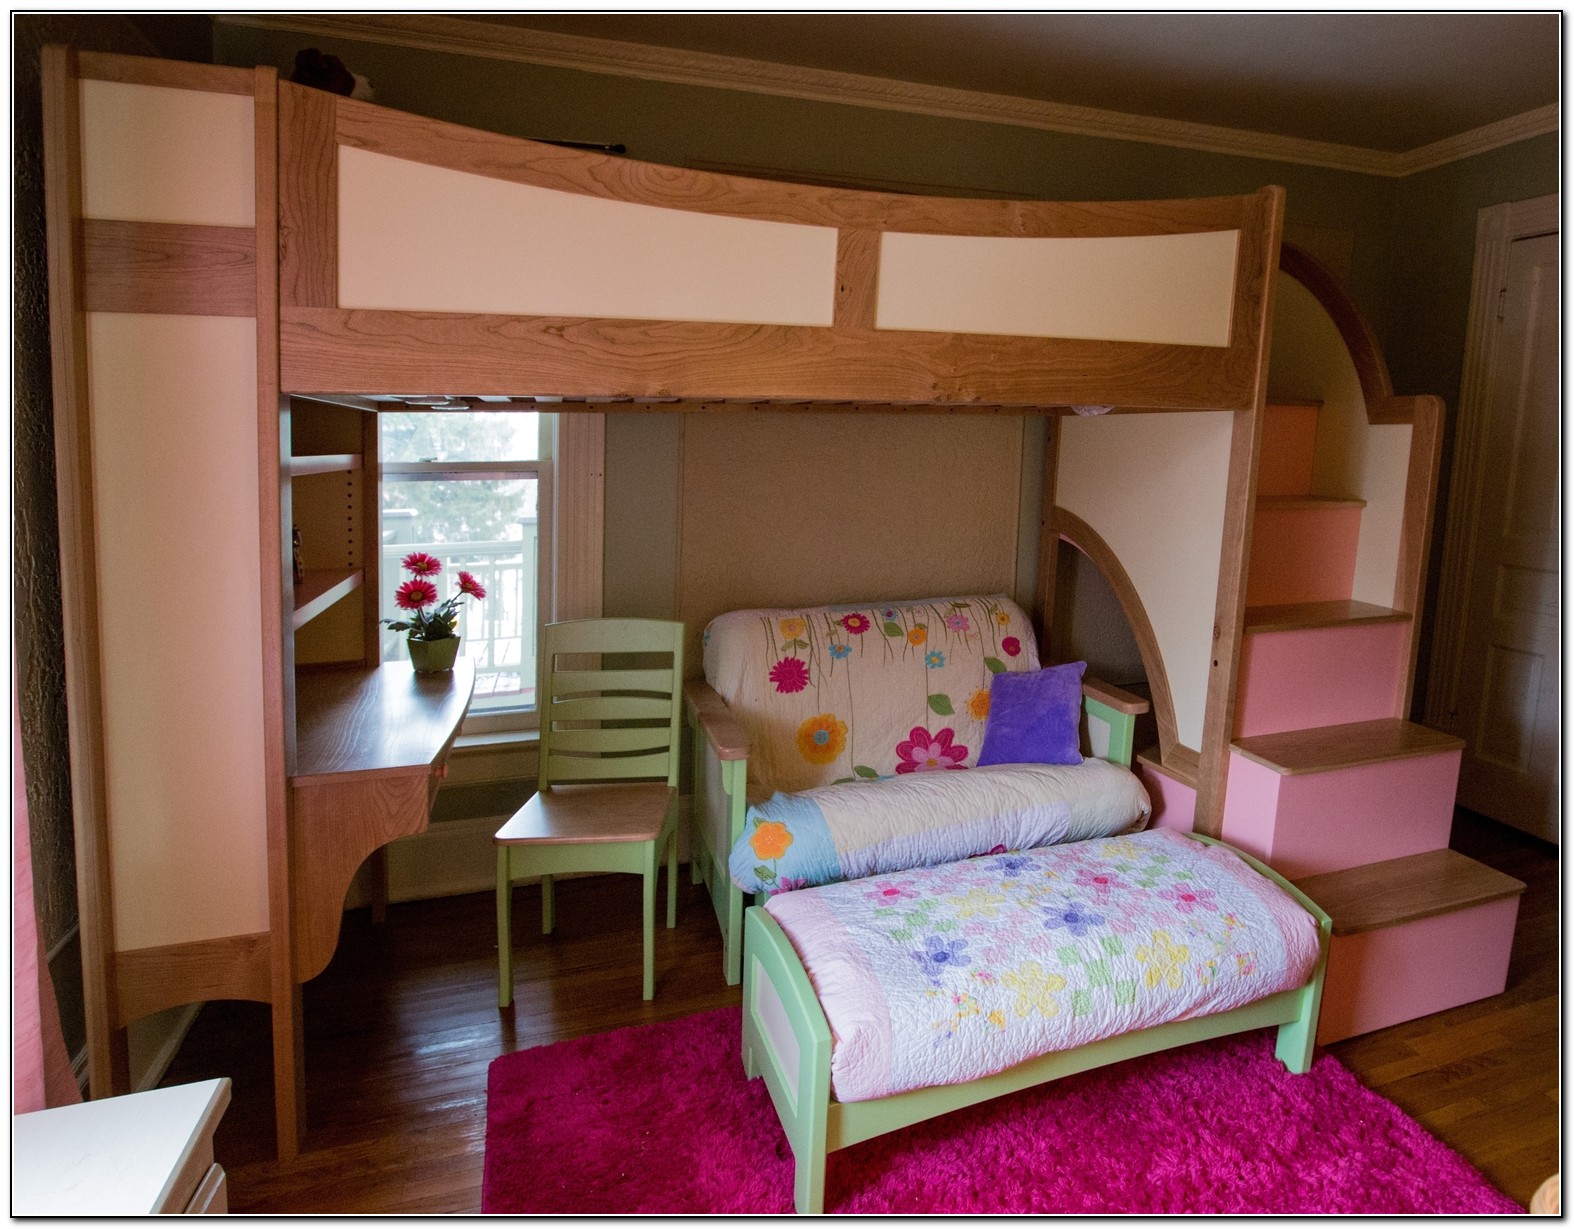 Bunk Beds With Stairs And Desk